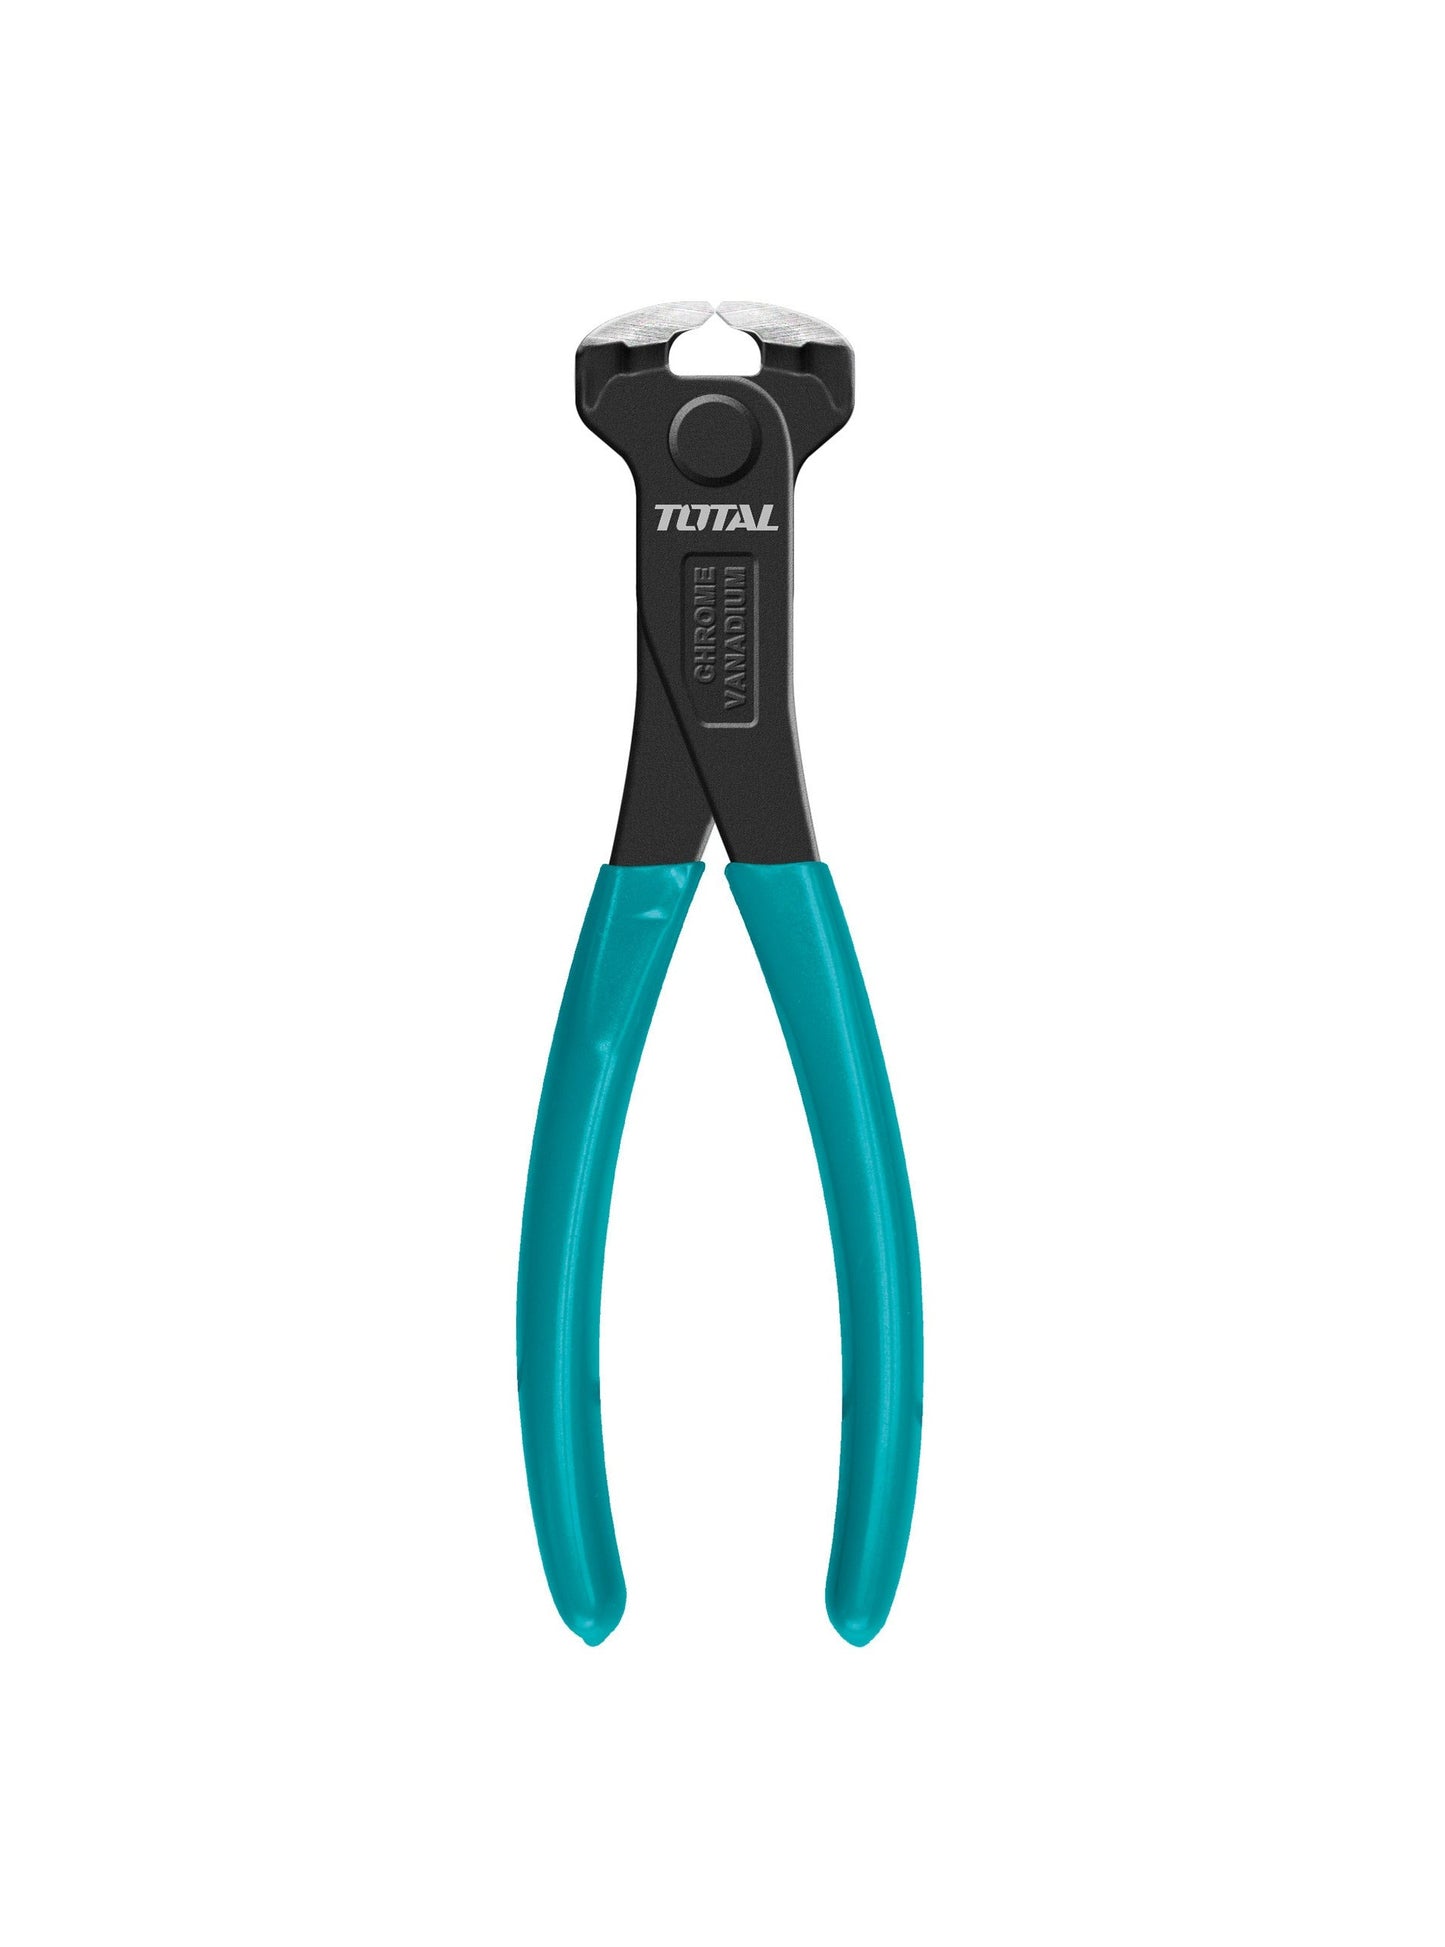 TOTAL	End cutting pliers	THT260702